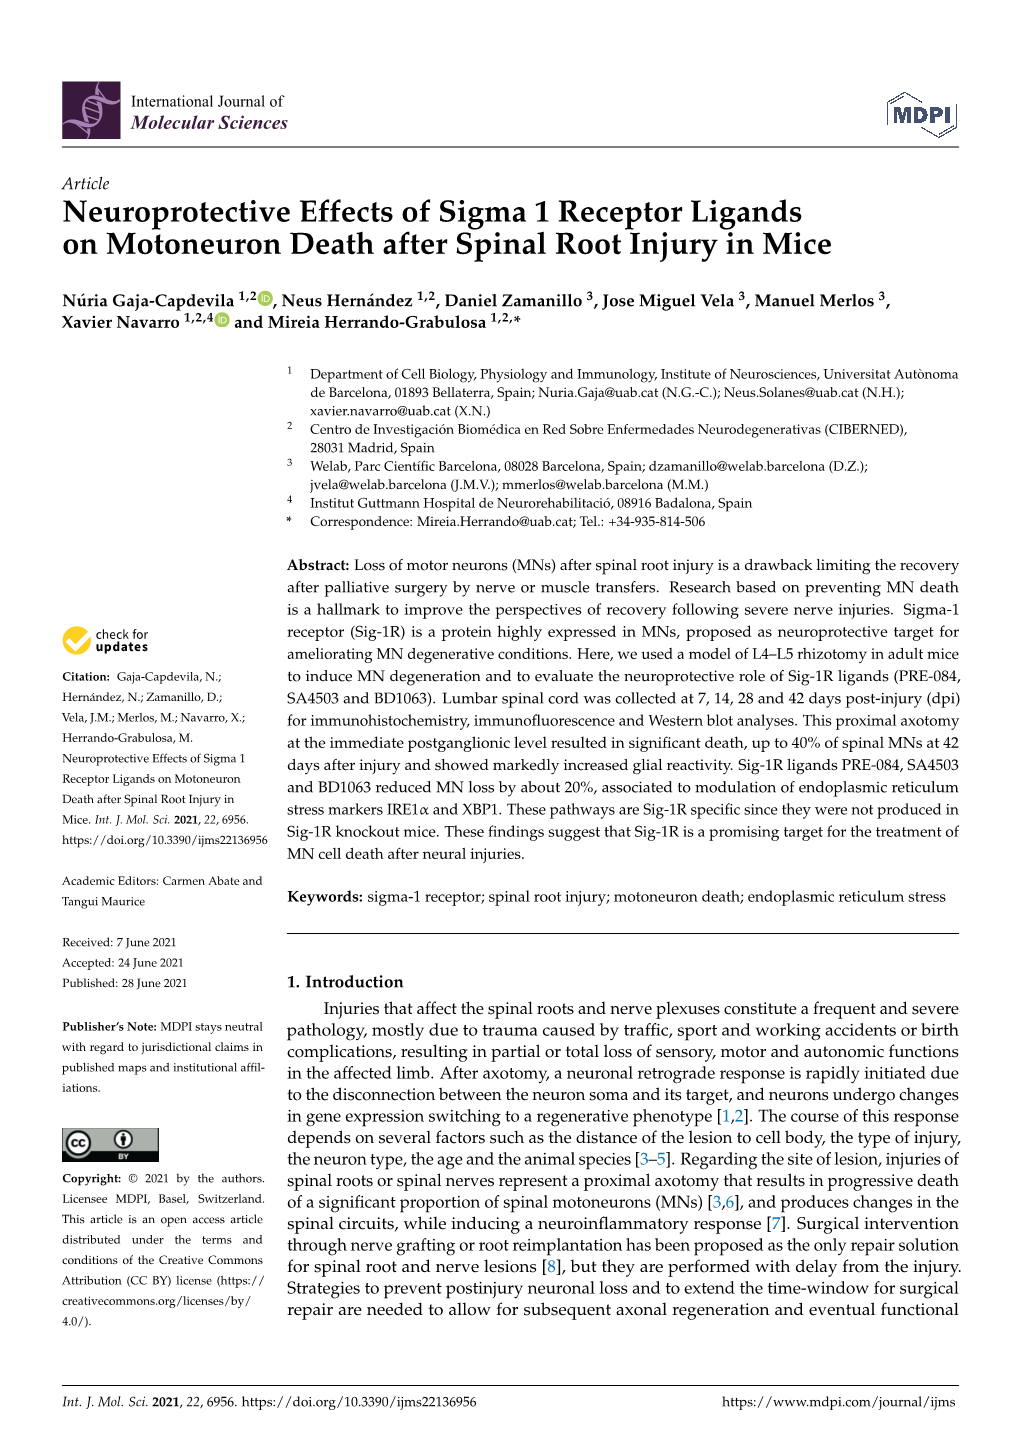 Neuroprotective Effects of Sigma 1 Receptor Ligands on Motoneuron Death After Spinal Root Injury in Mice